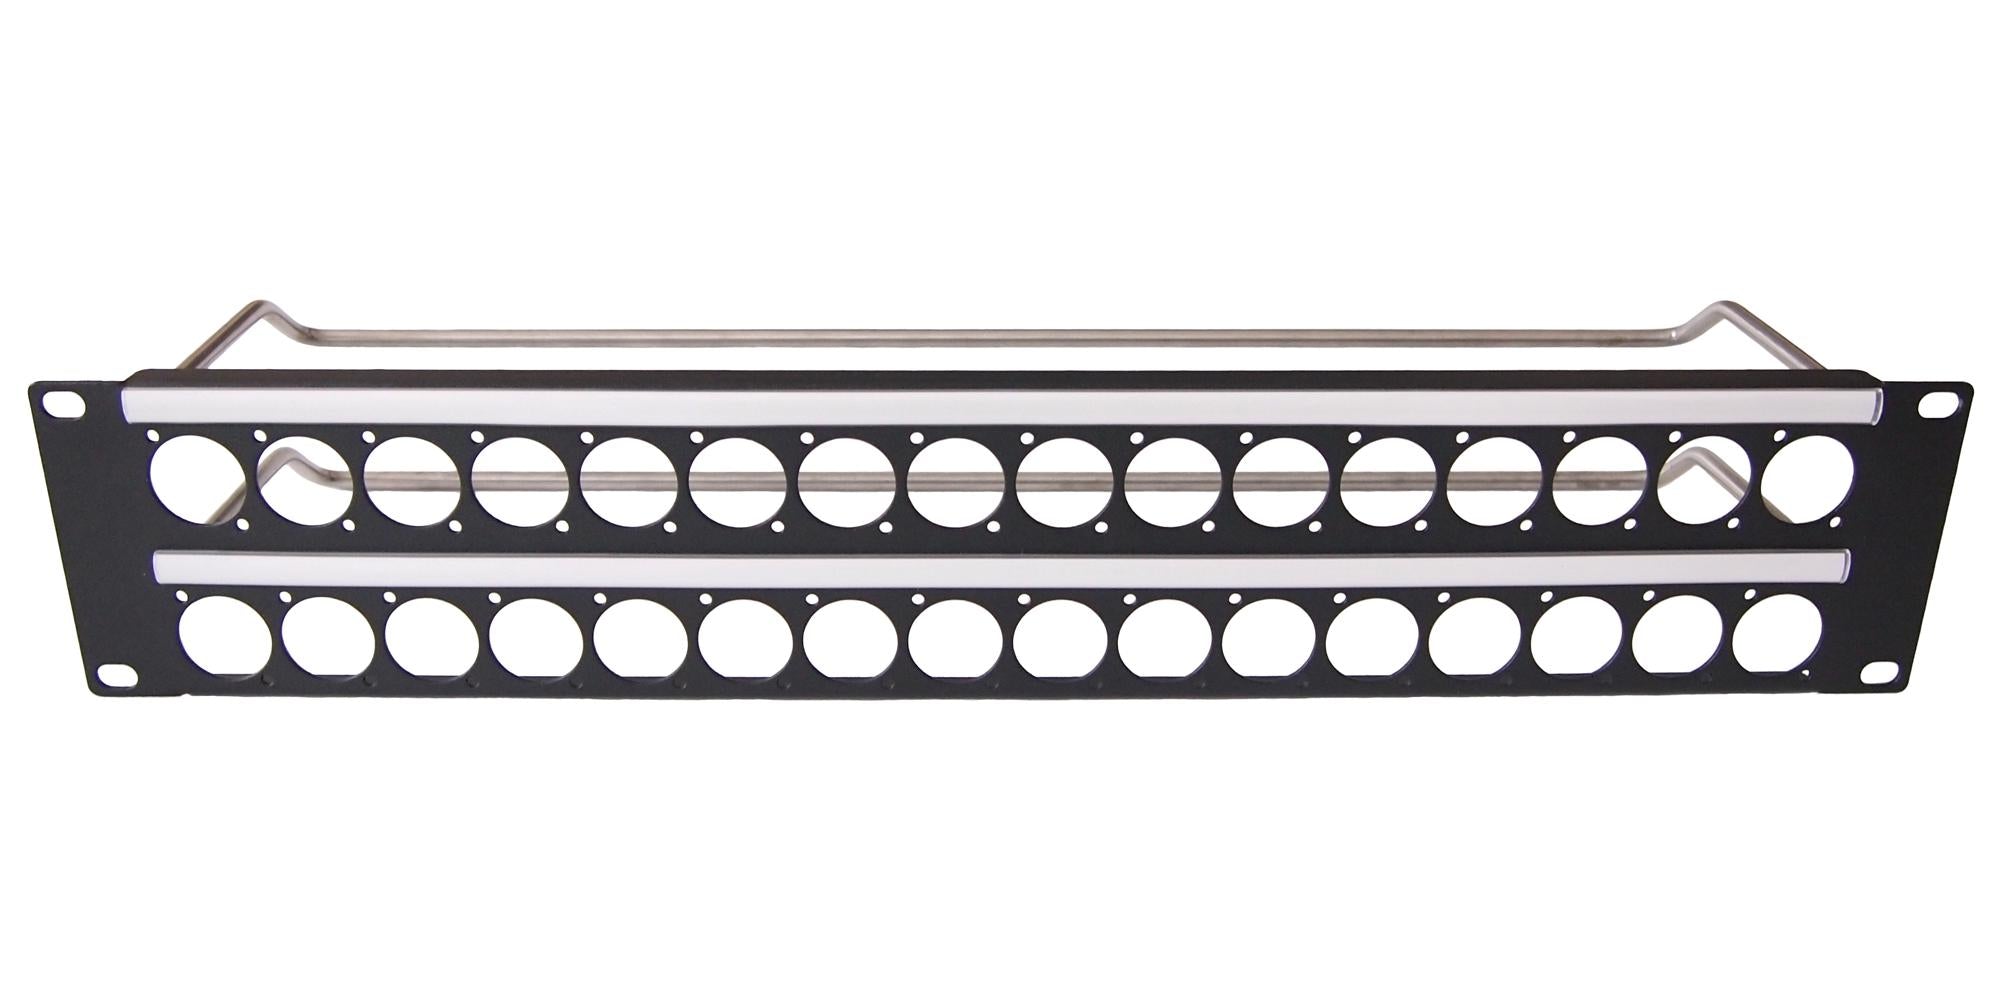 CP30157 PATCH PANEL,W/ 4-40 HOLE, 32PORT, 2U CLIFF ELECTRONIC COMPONENTS